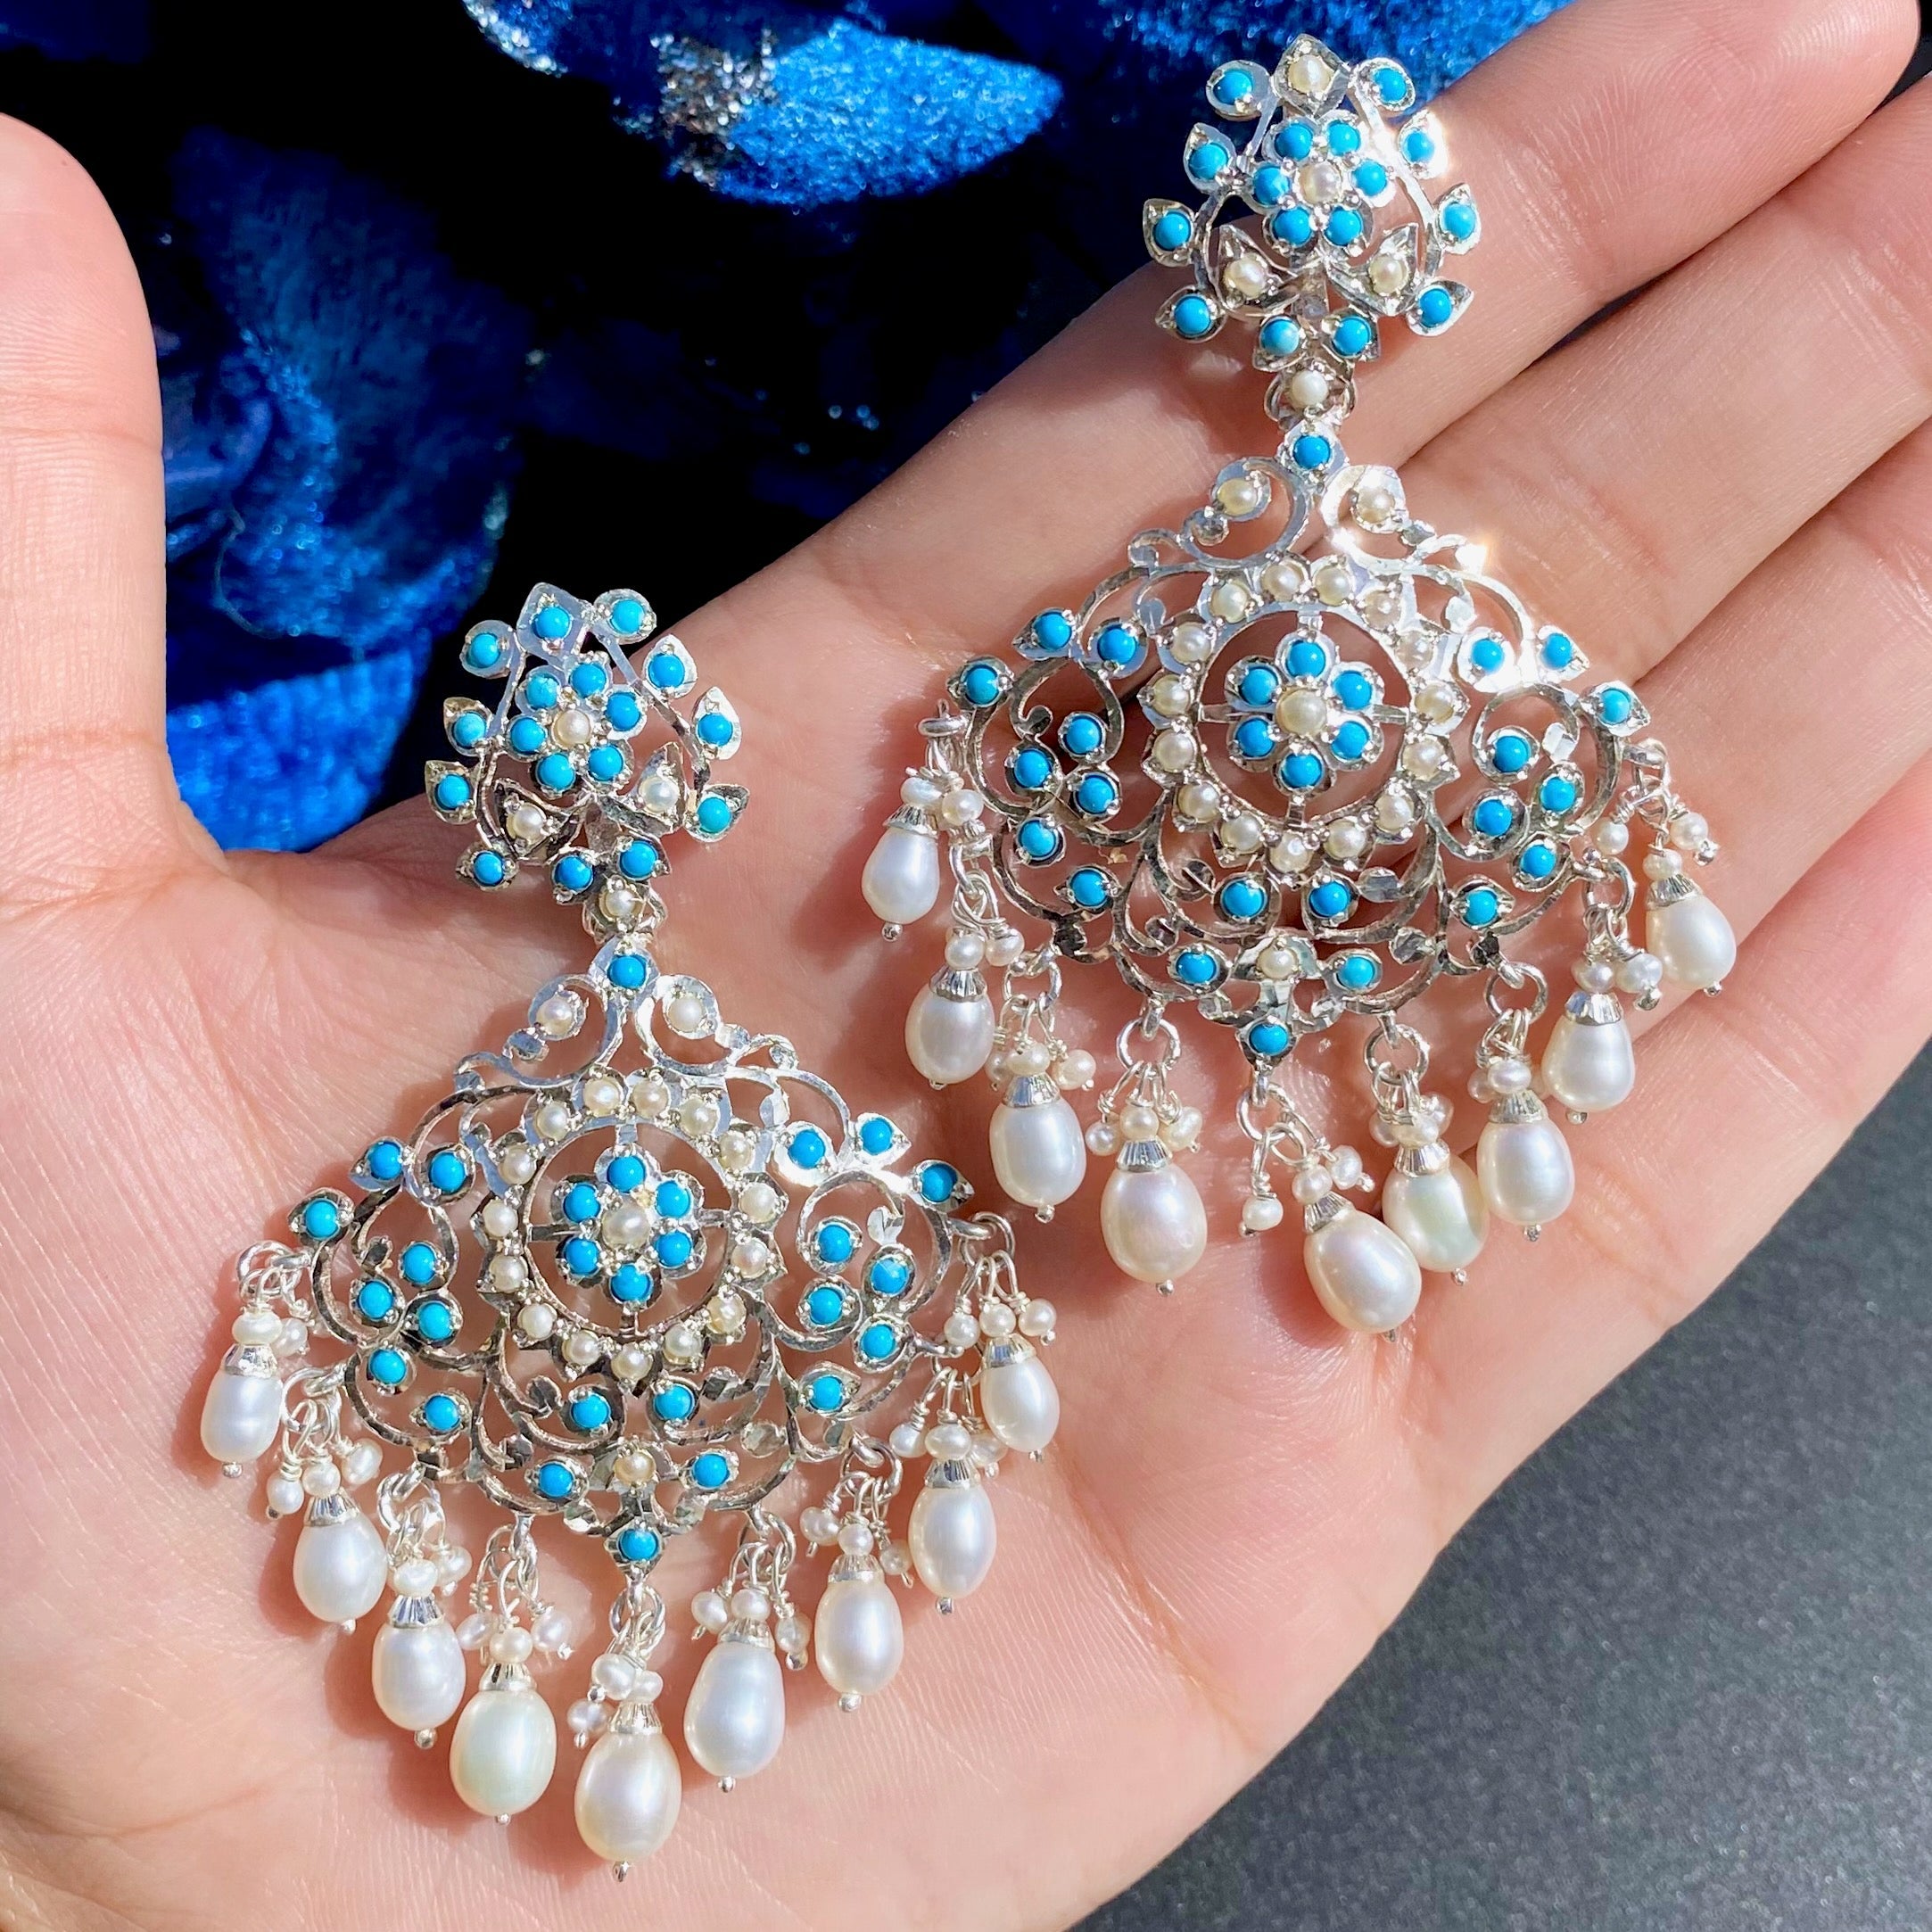 Edwardian Earrings | Pearls & Turquoise Studded | 925 Sterling Silver